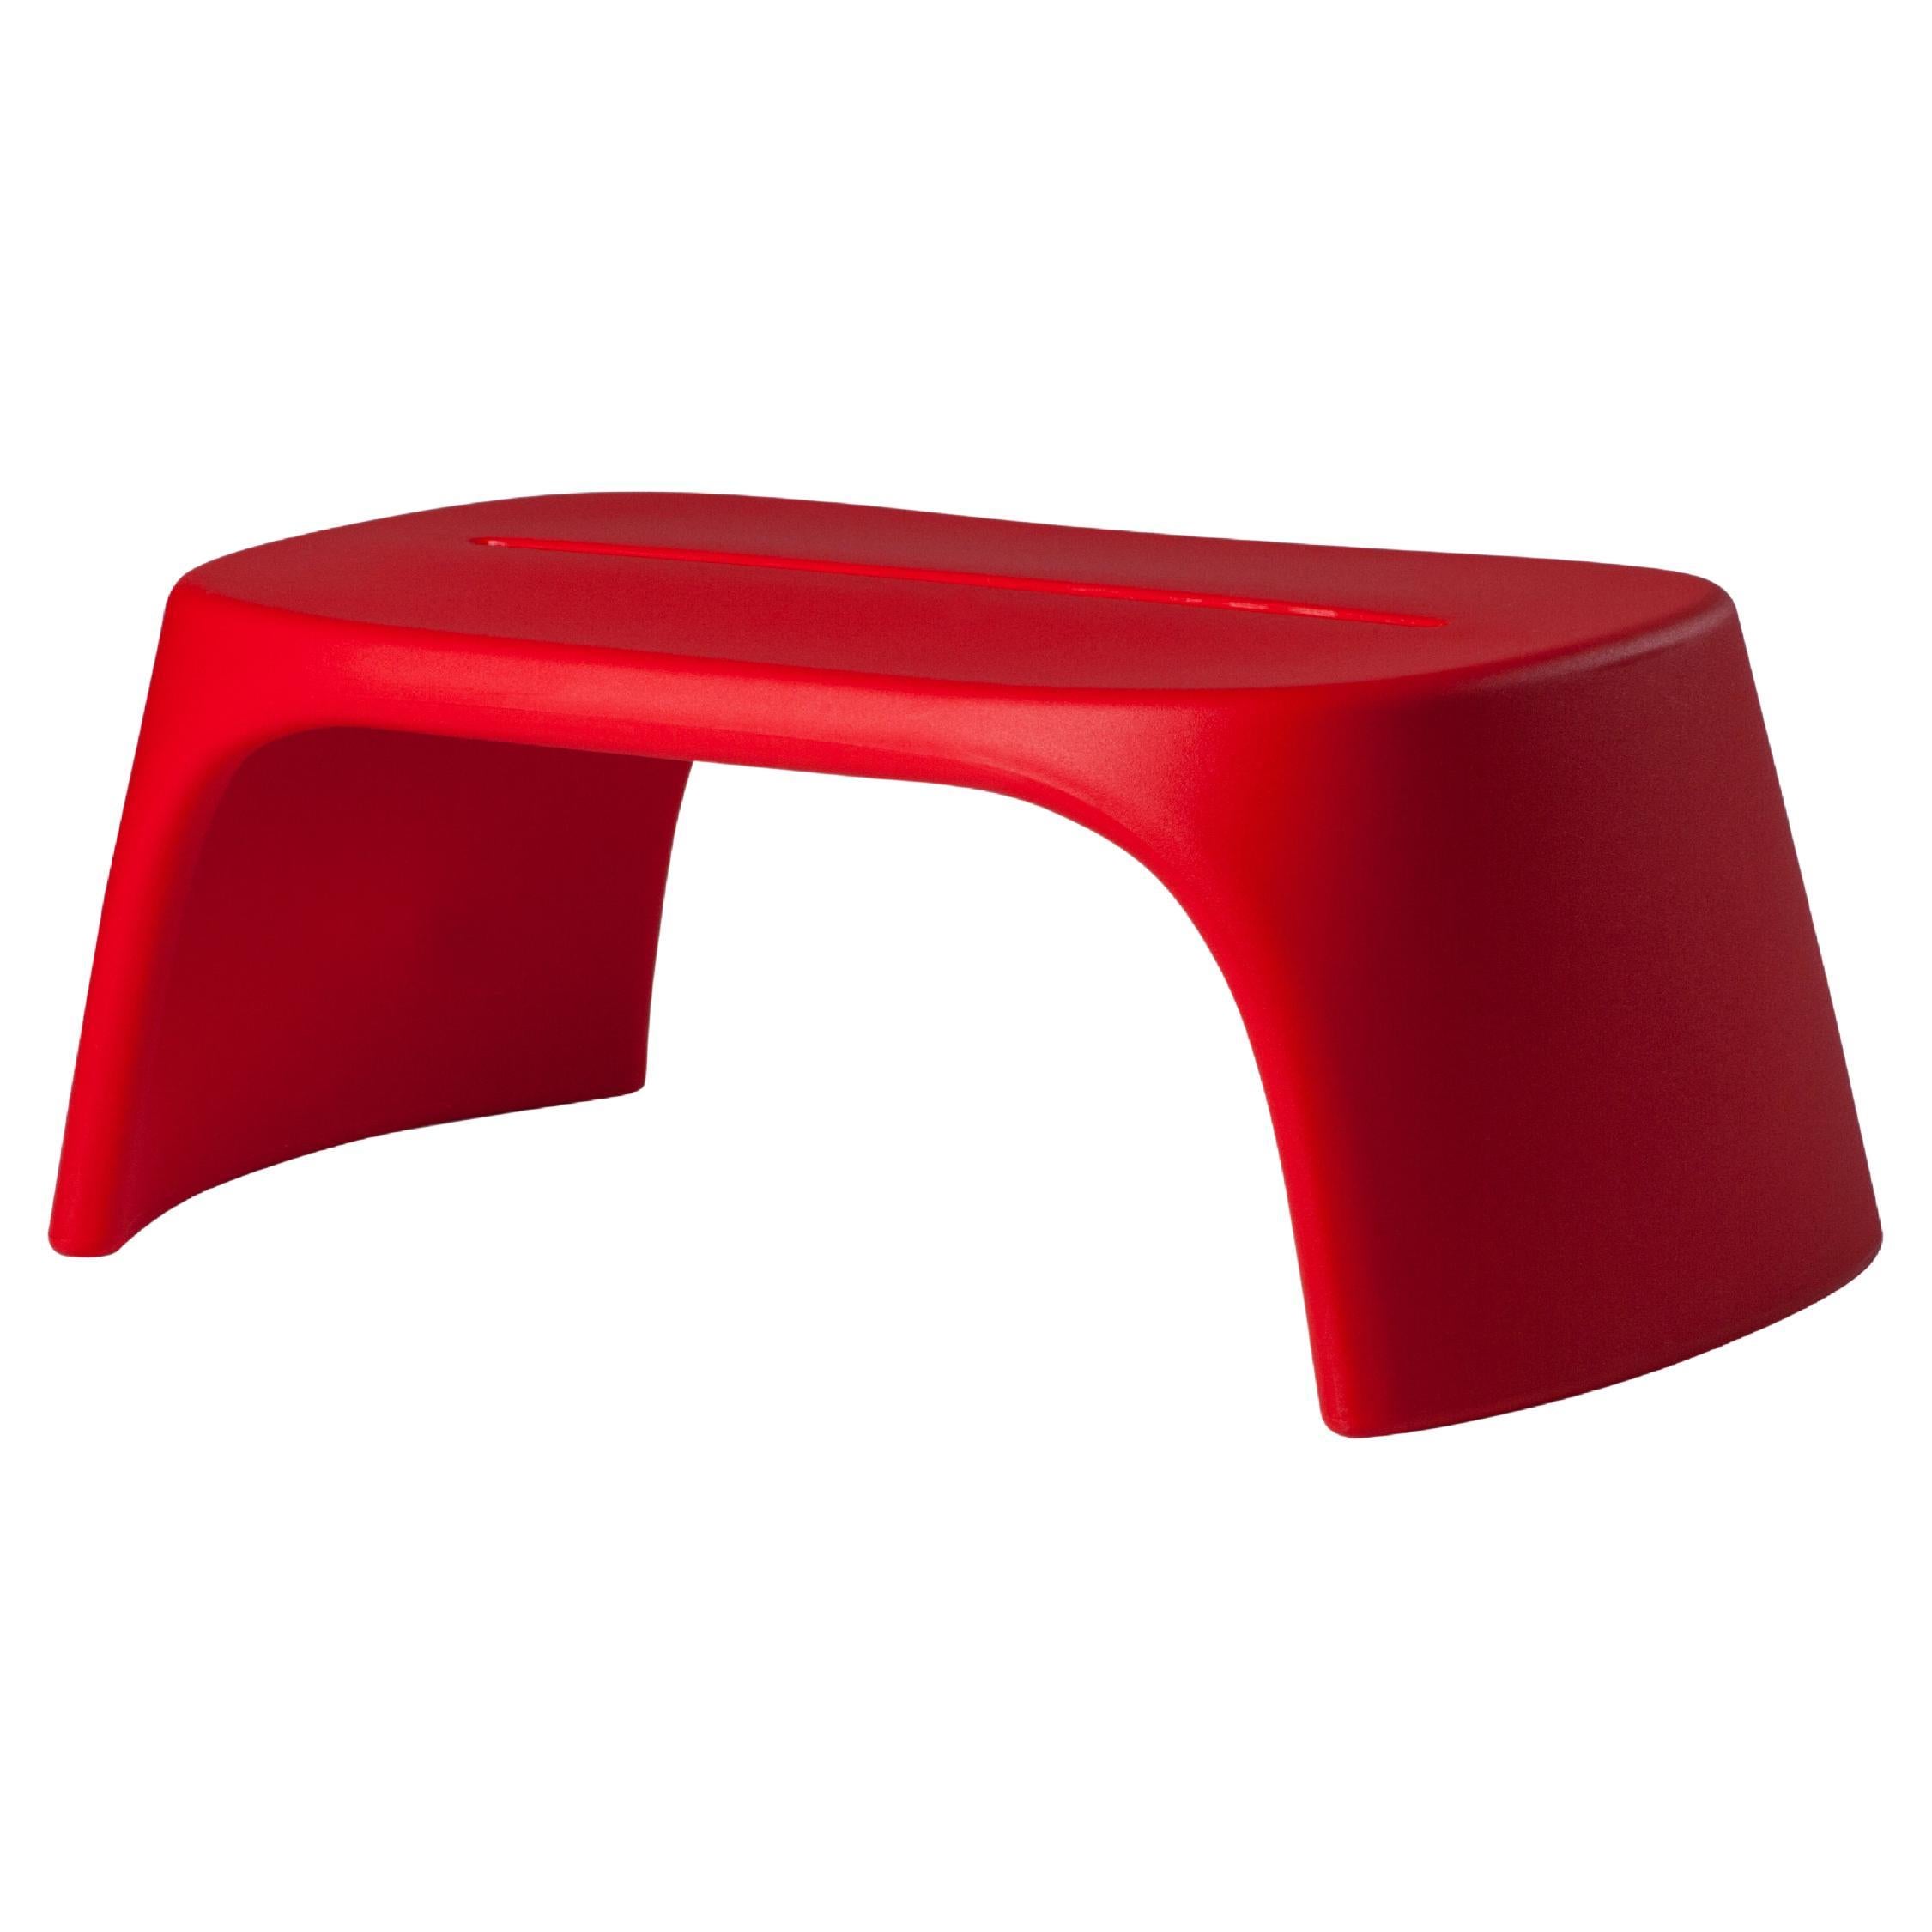 Slide Design Amélie Panchetta Bench in Flame Red by Italo Pertichini For Sale